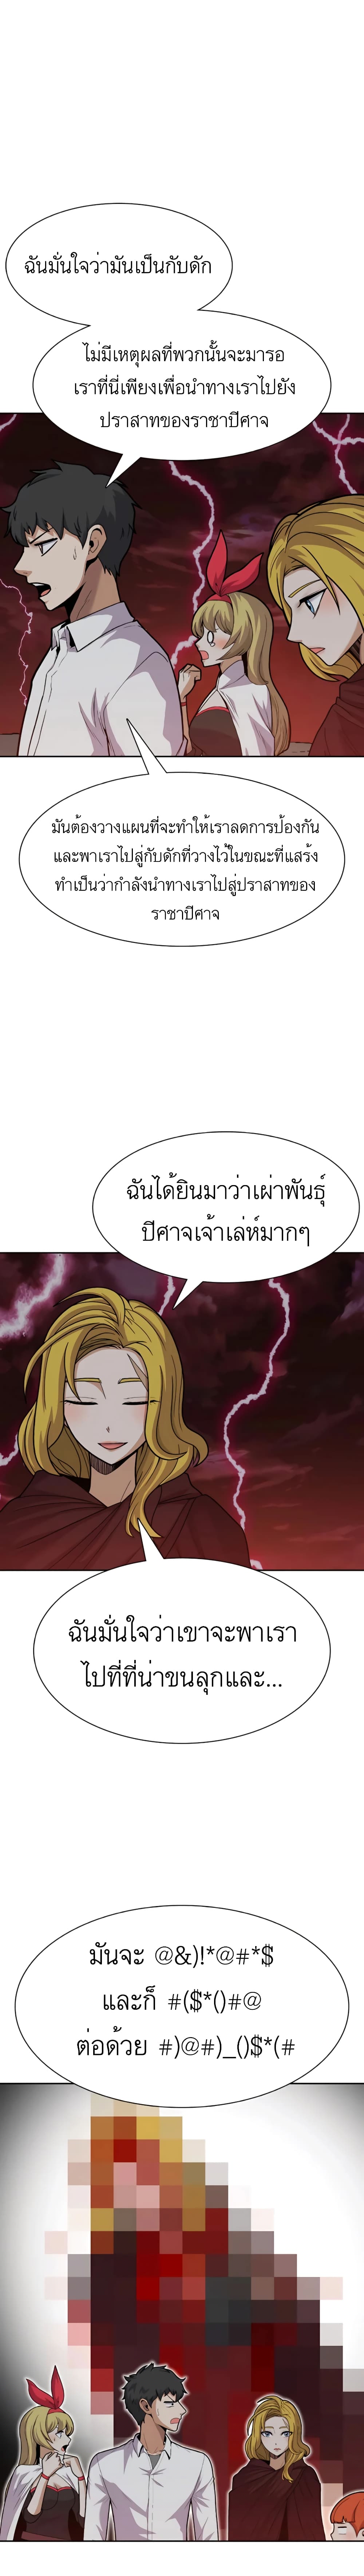 Raising Newbie Heroes In Another World ตอนที่ 28 (5)